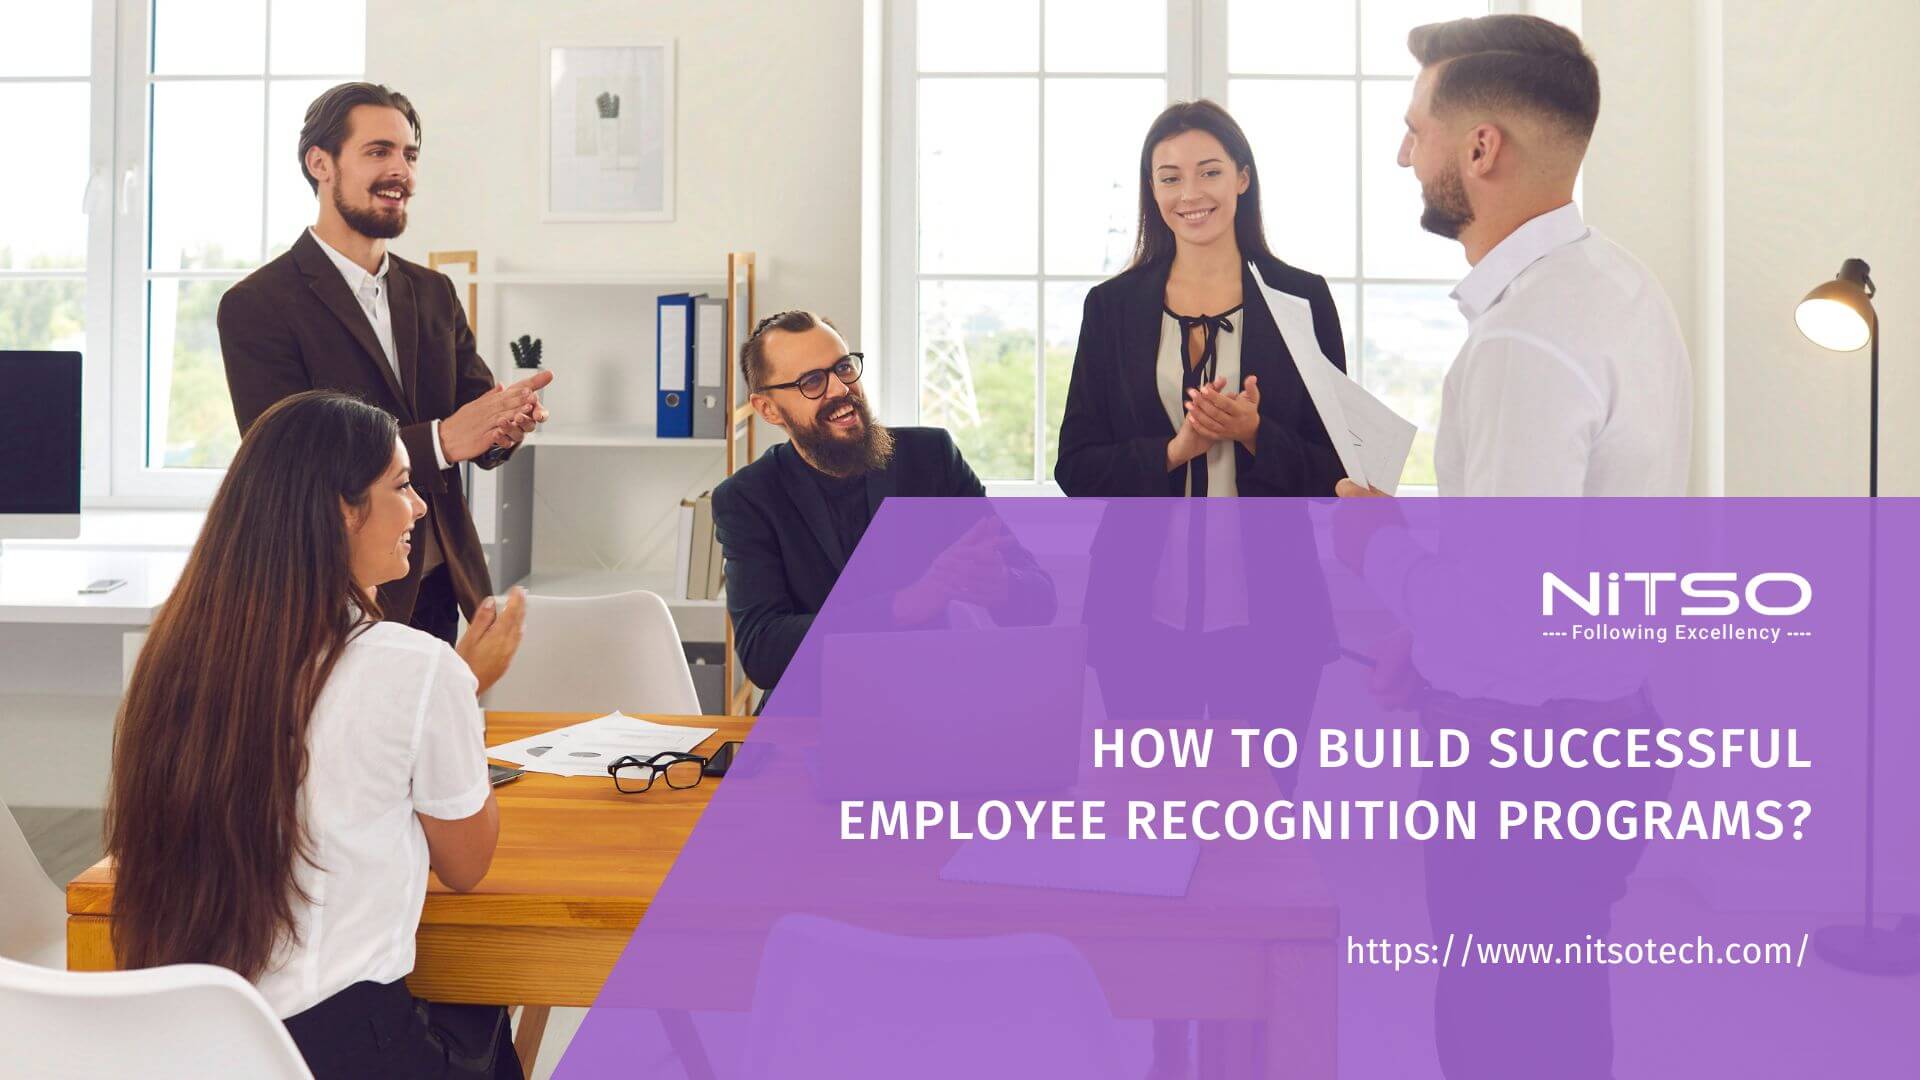 How to Build Successful Employee Recognition Programs?